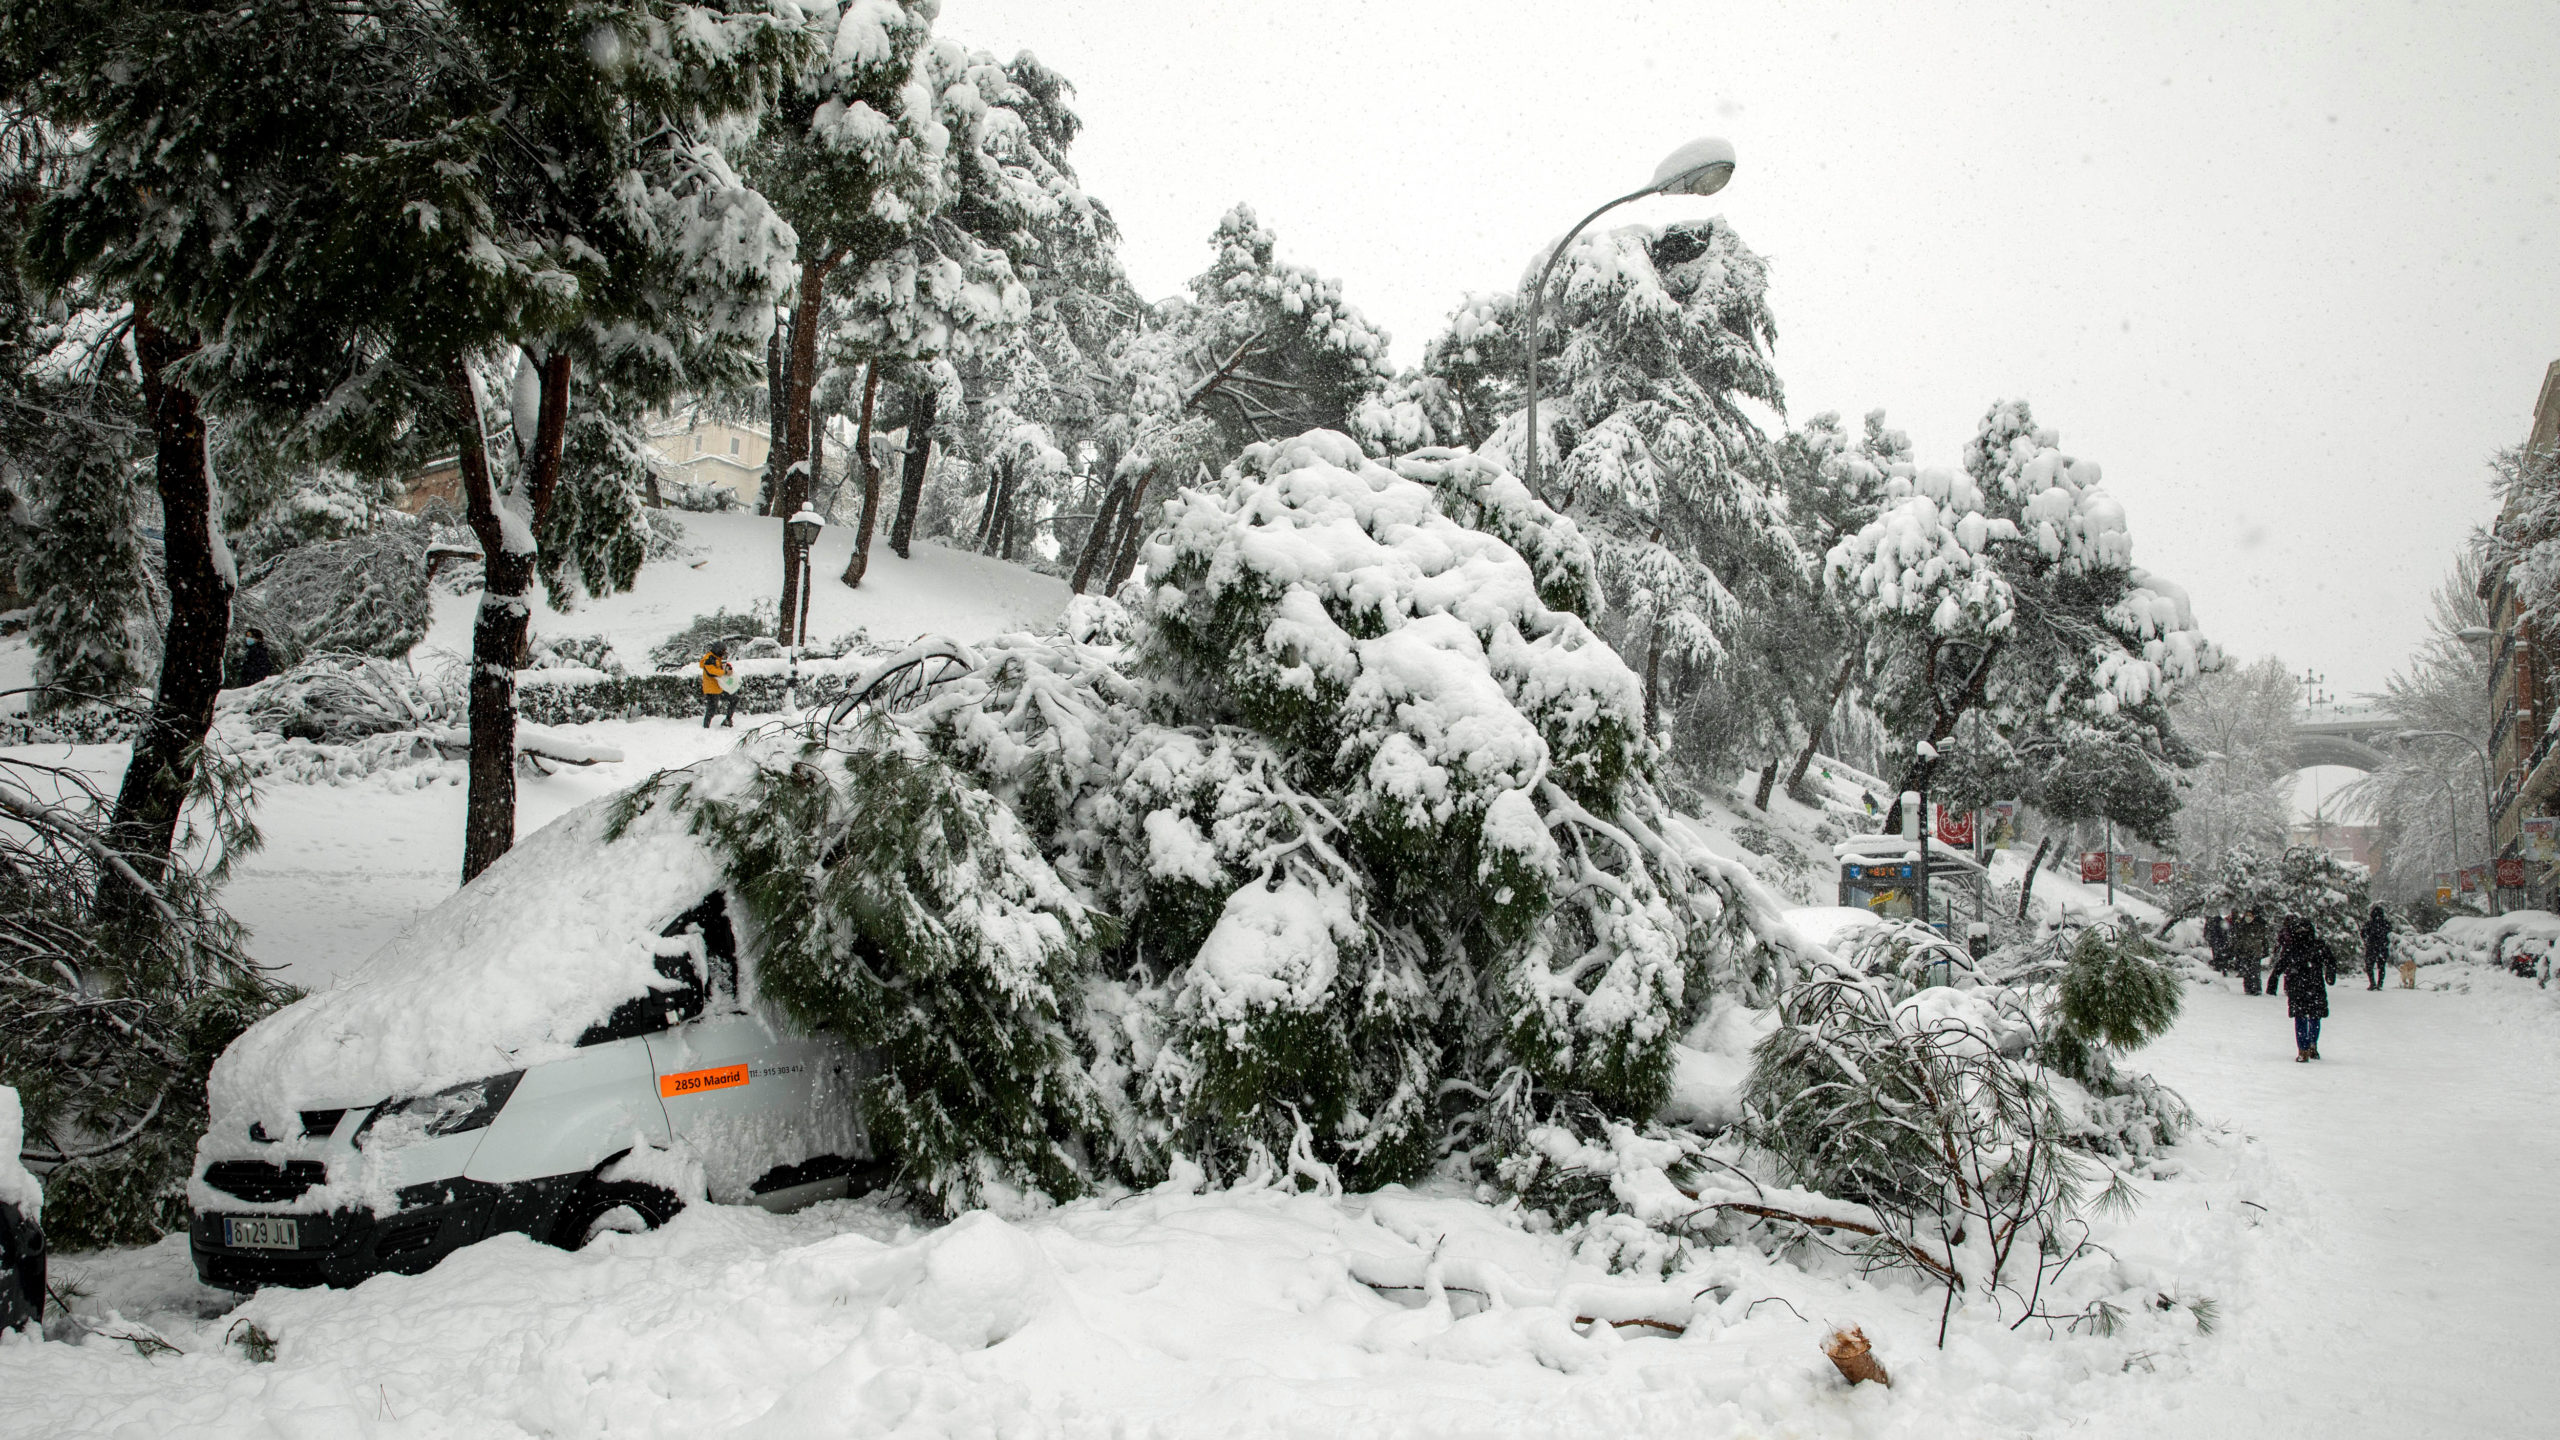 A tree has fallen on top of a car during heavy snowfall on January 09, 2021 in Madrid, Spain. (Photo: Pablo Blazquez Dominguez, Getty Images)